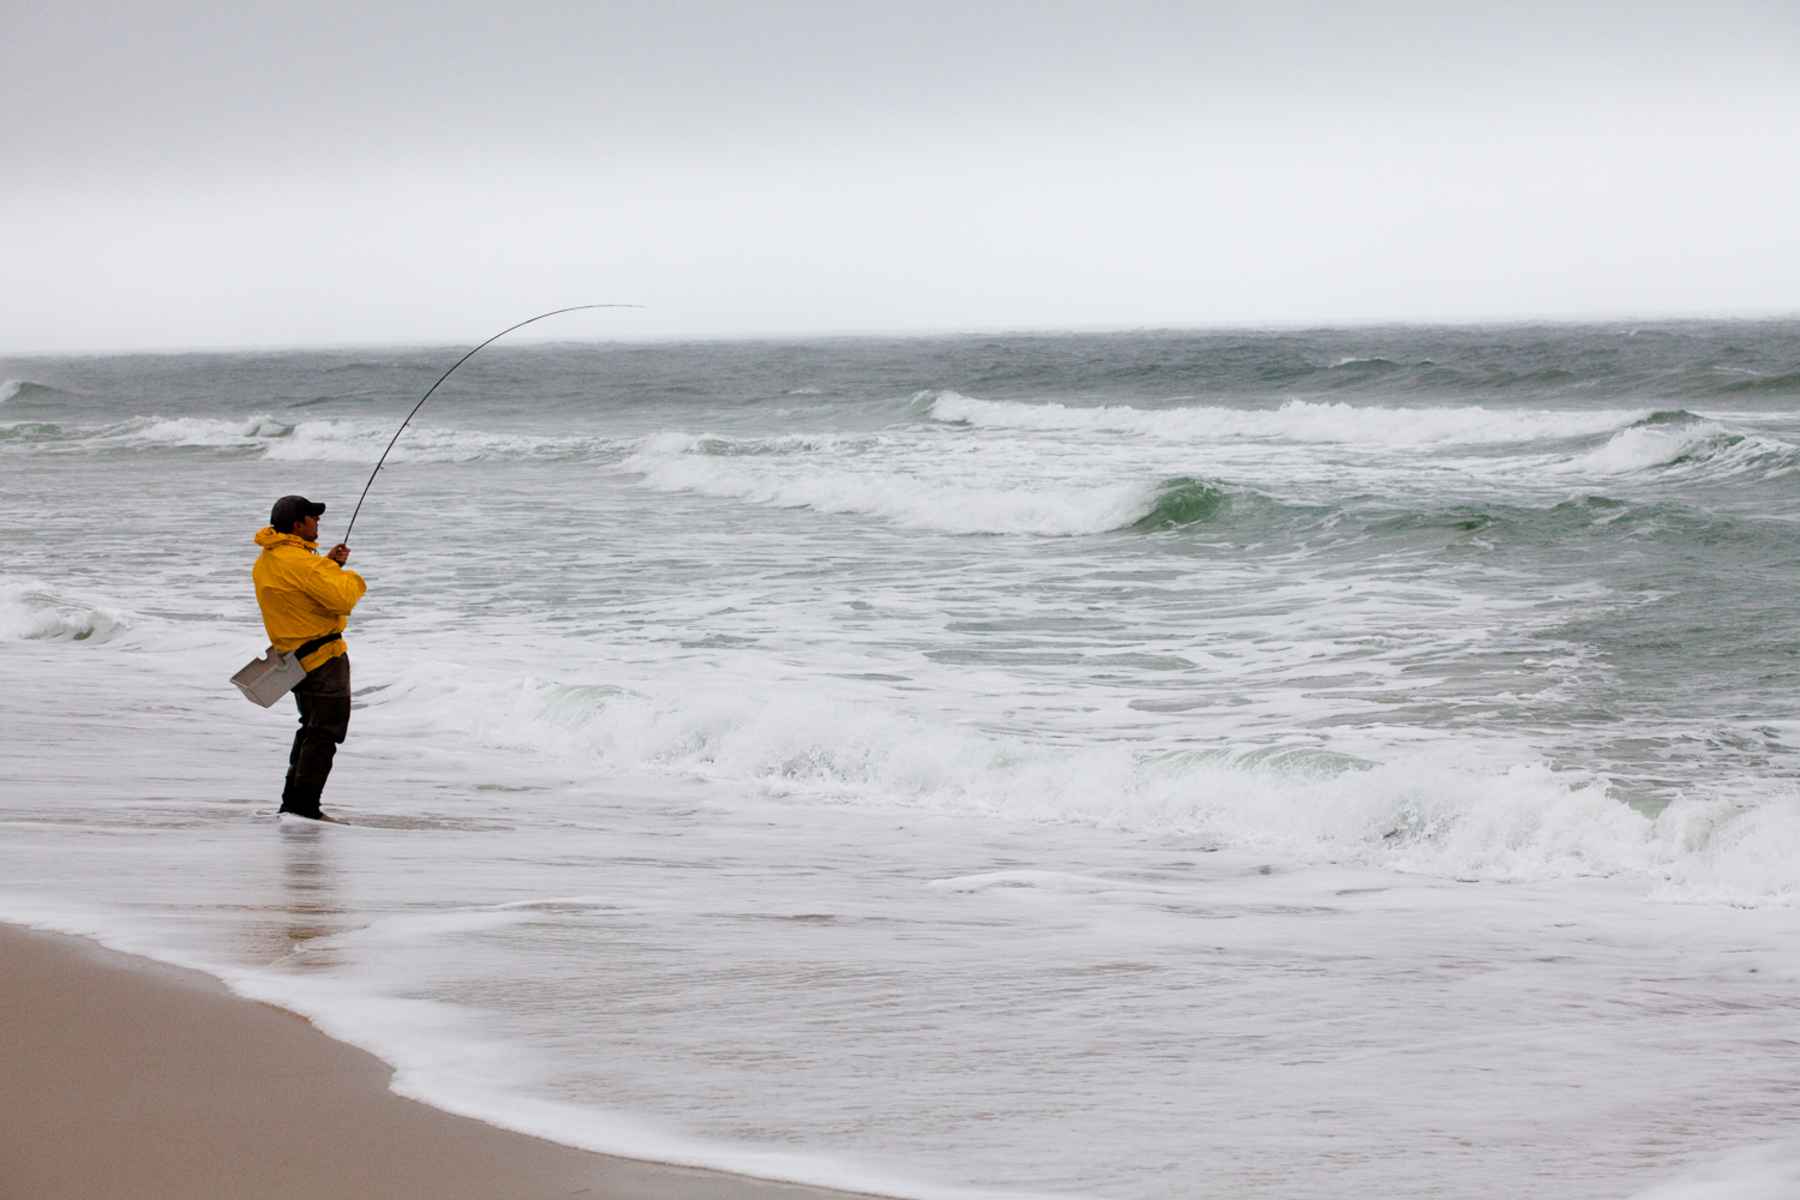 Andy's Mid Coast Fishing Hit List - Maine Sport Outfitters